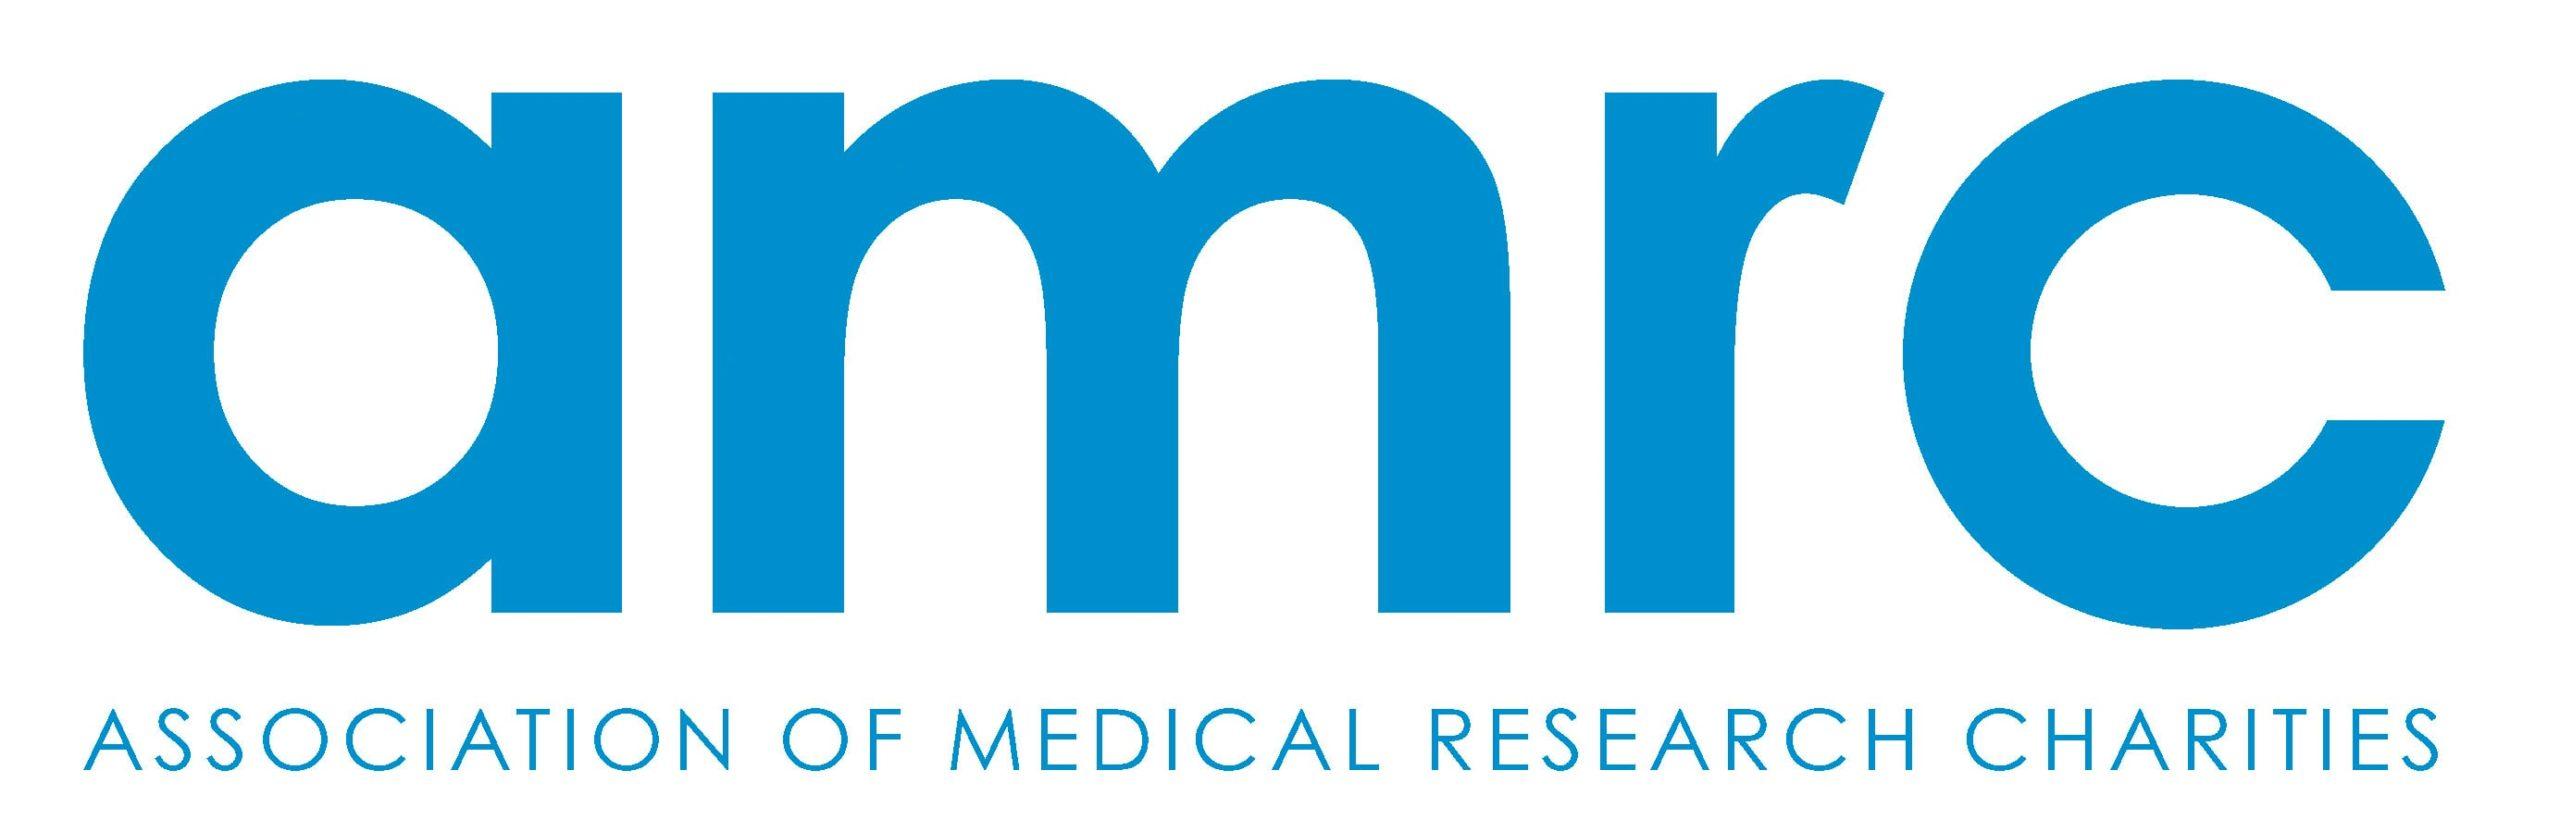 Association-of-Medical-Research-Charities